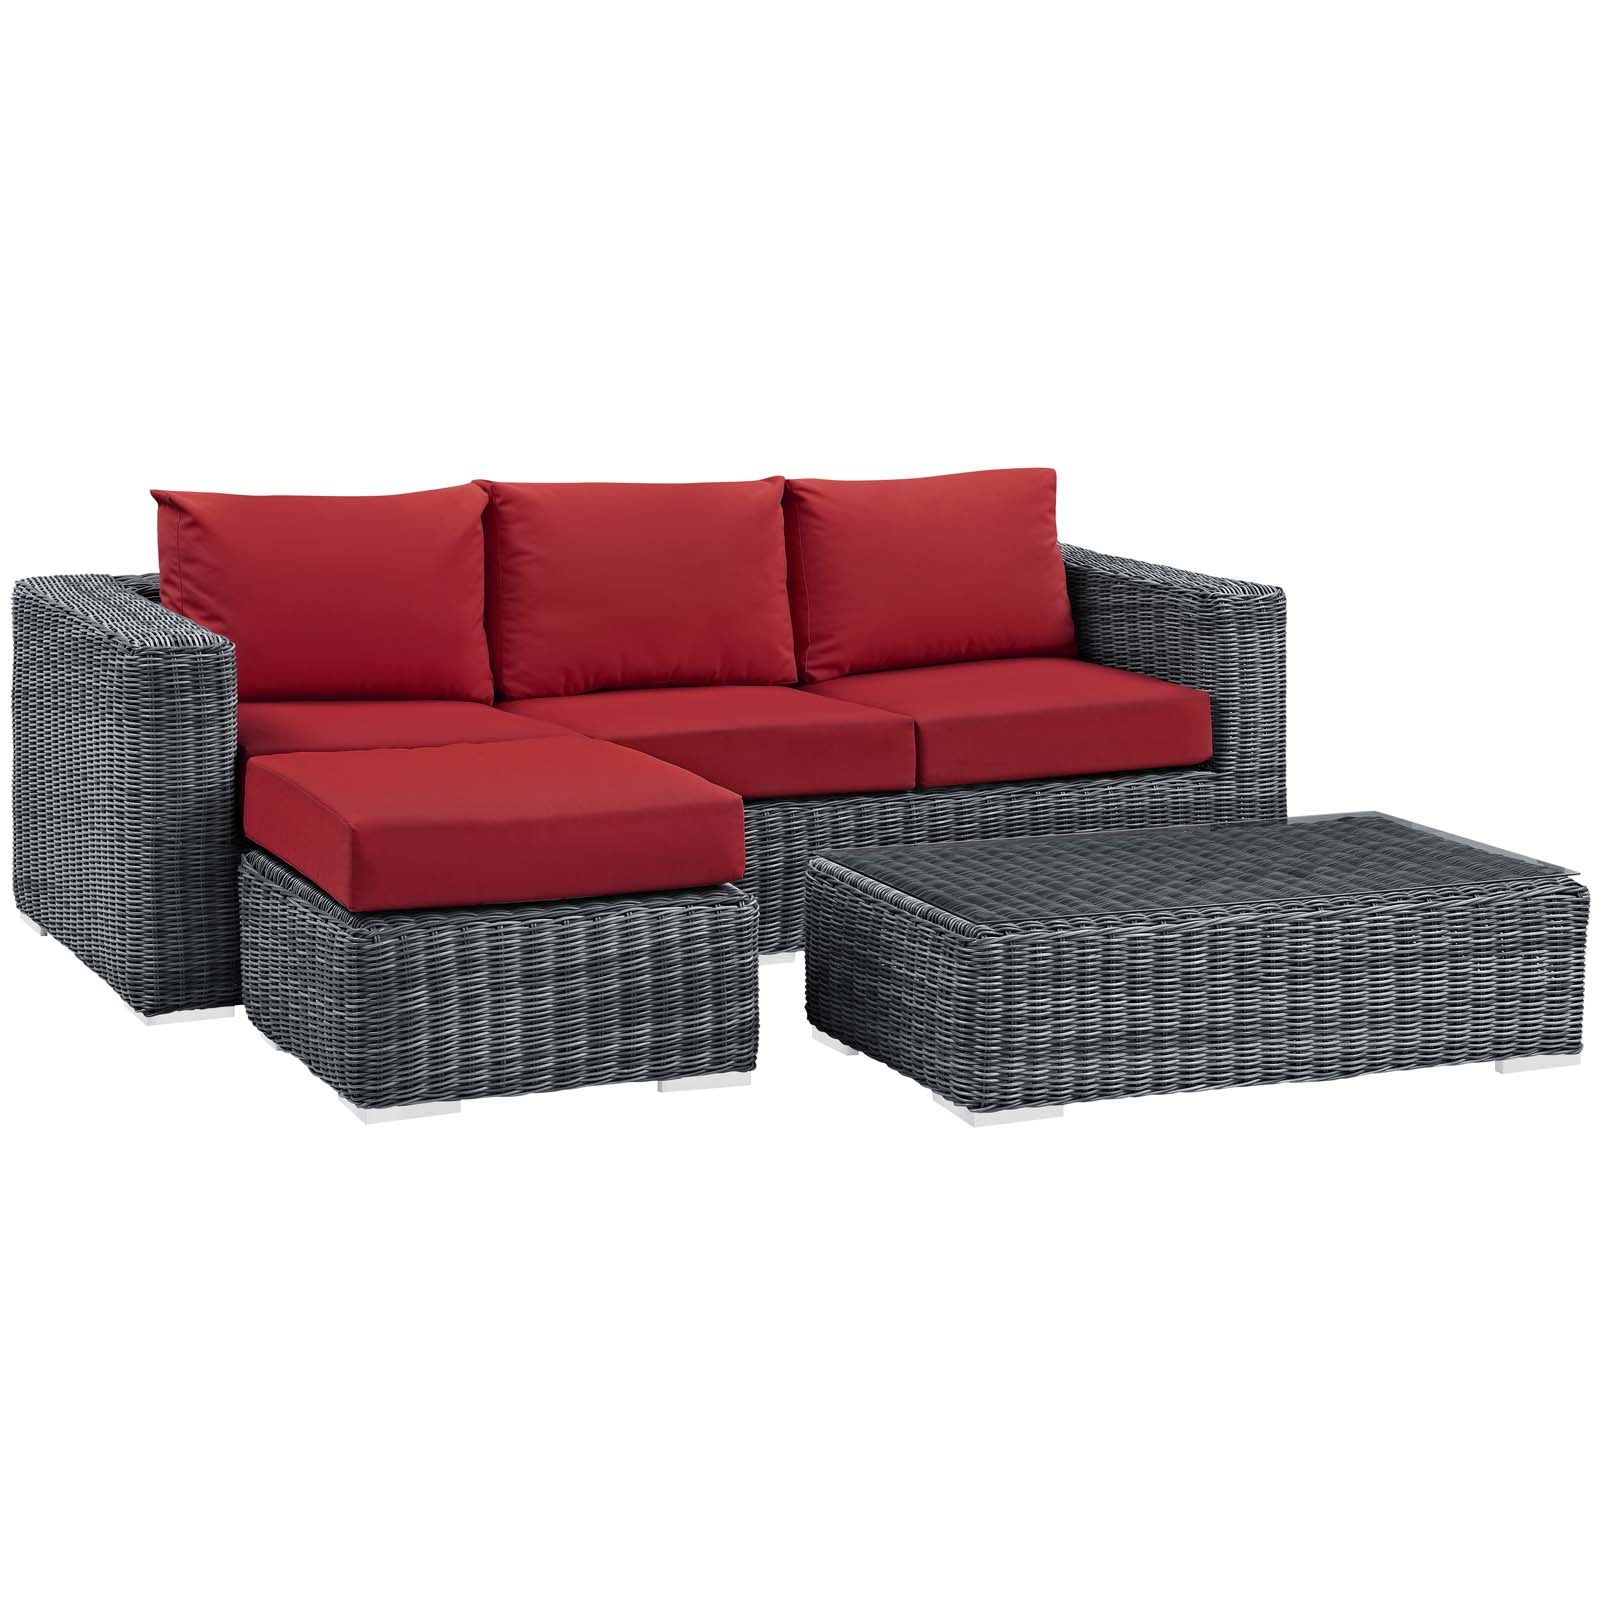 Summon 3 Piece Outdoor Patio Sunbrella® Sectional Set-Outdoor Sectional-Modway-Wall2Wall Furnishings